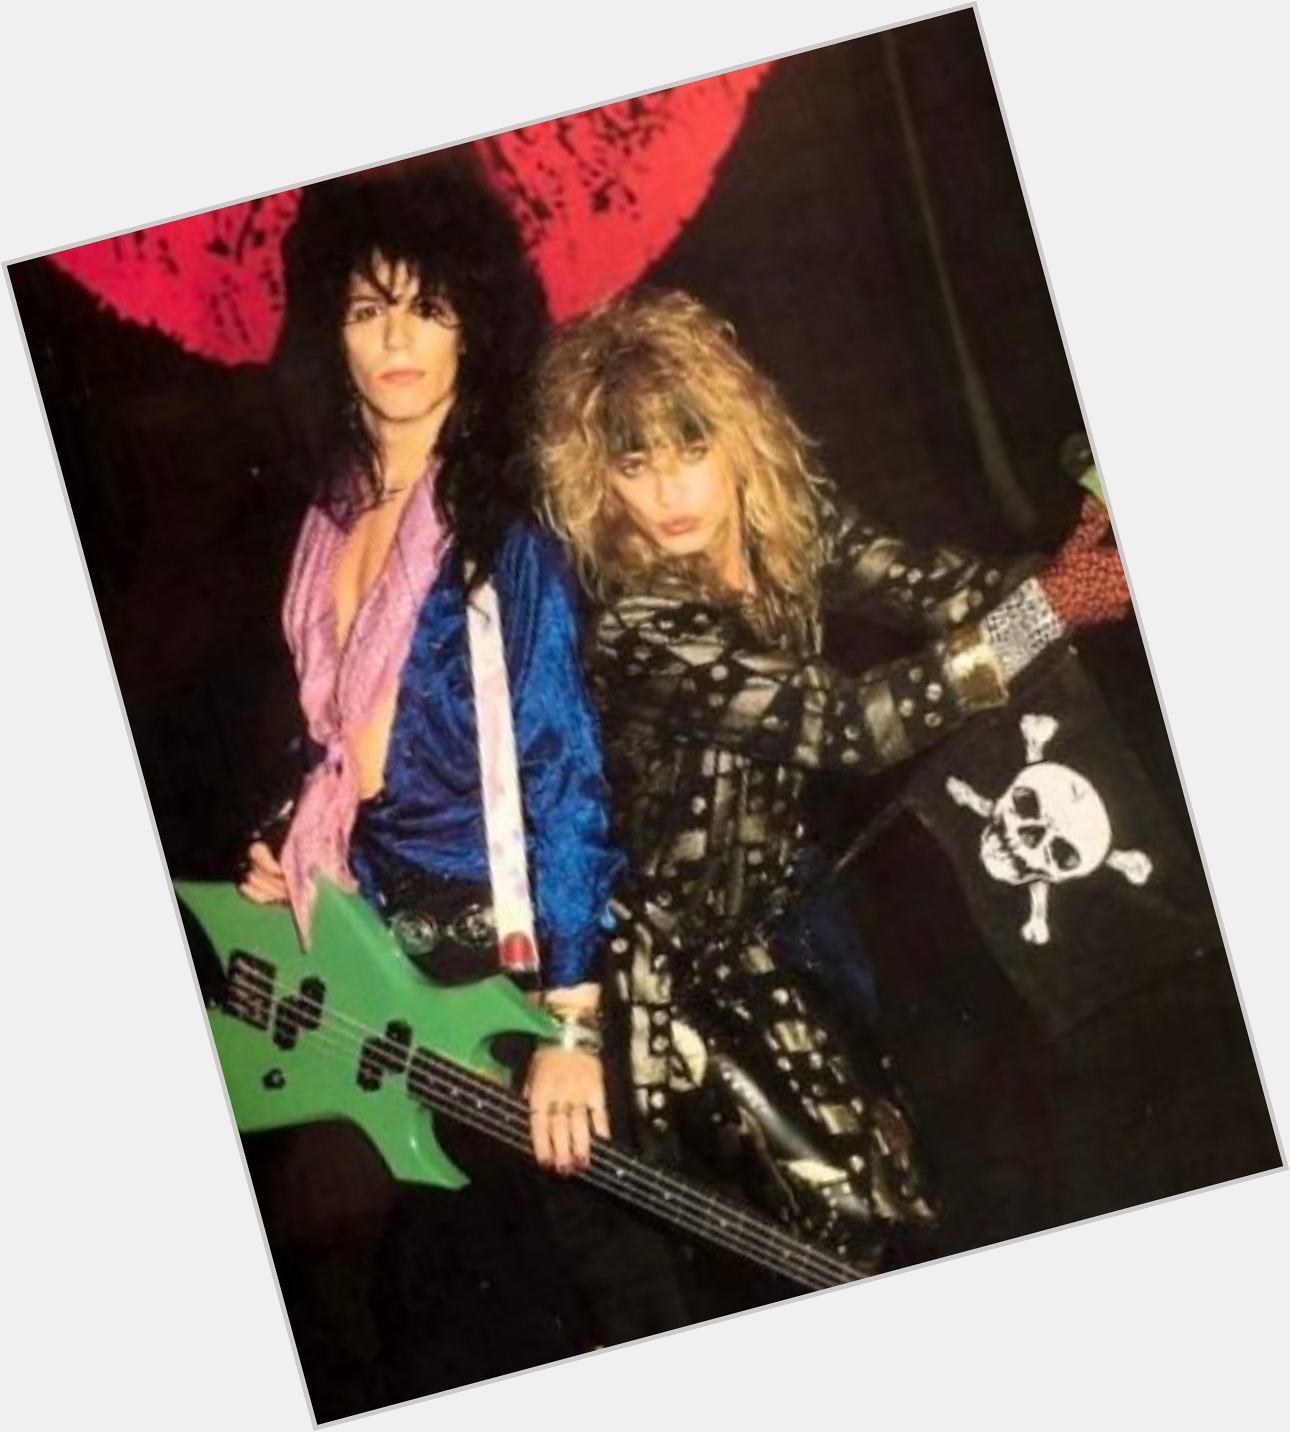 Happy Birthday to the guy with the cool lime green BC Rich Warlock bass! Bobby Dall from Poison turns 52 today! 